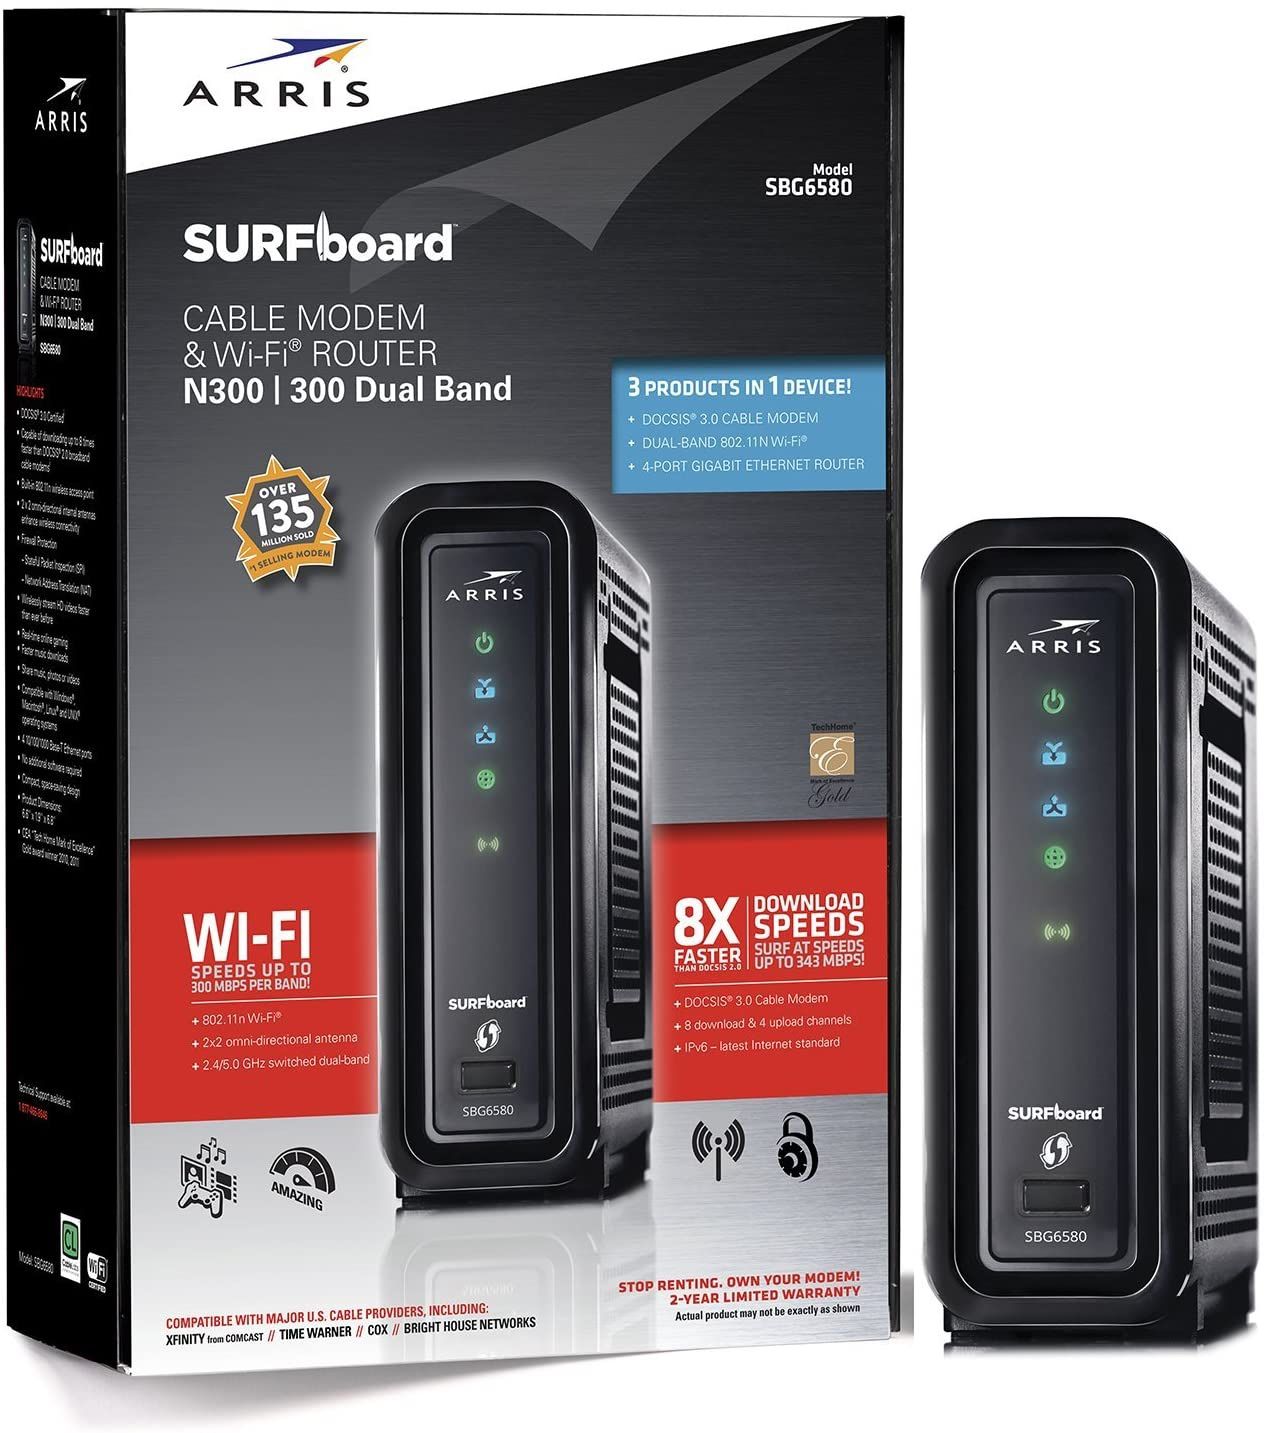 ARRIS SURFboard SBG6580 DOCSIS 3.0 Cable Modem/ Wi-Fi N300 2.4Ghz + N300 5GHz Dual Band Router - Black 